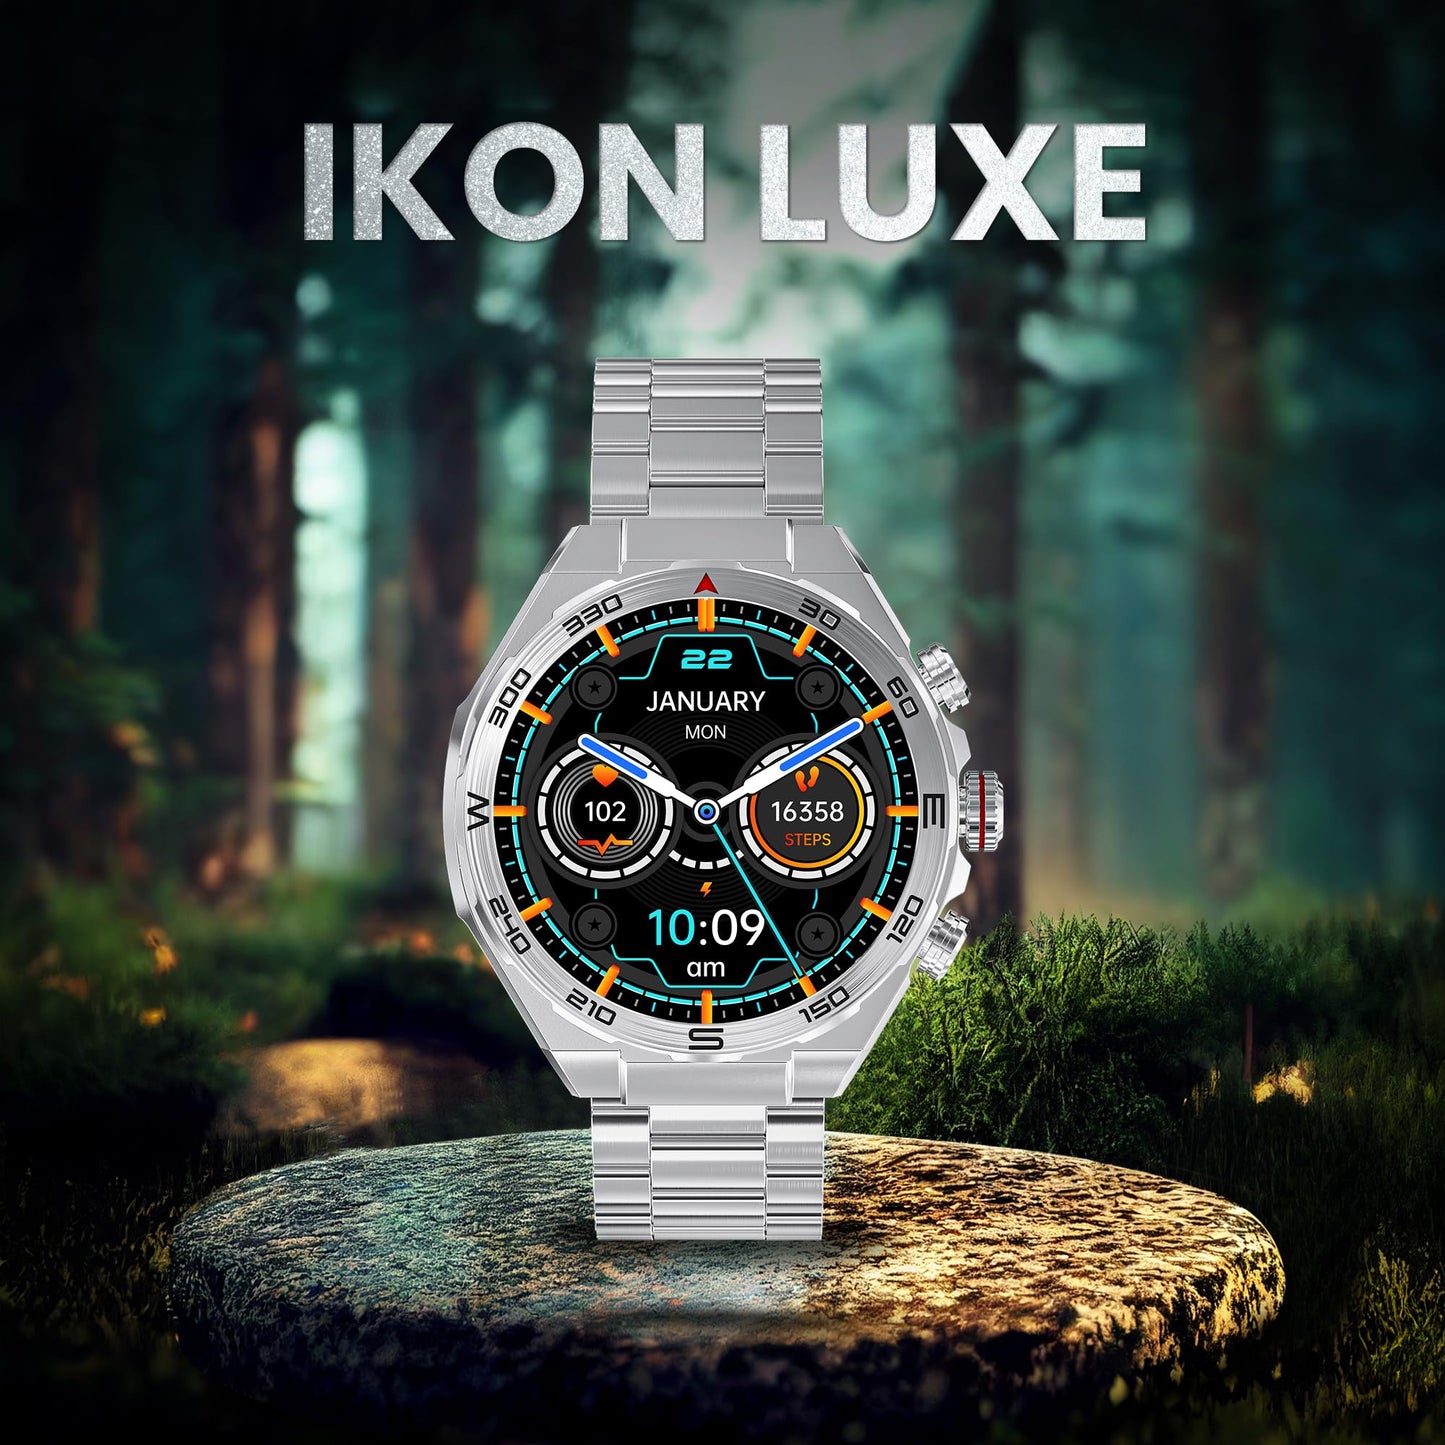 GIZMORE IKON Luxe 3.93cm (1.55) FHD Display | AOD with 600 NITS I Active Crown & 3 Buttons Control | IP68 | Zinc Alloy Metal Body | 15 Days Battery & 120 Sport Modes I BT Calling Smartwatch (Silver)